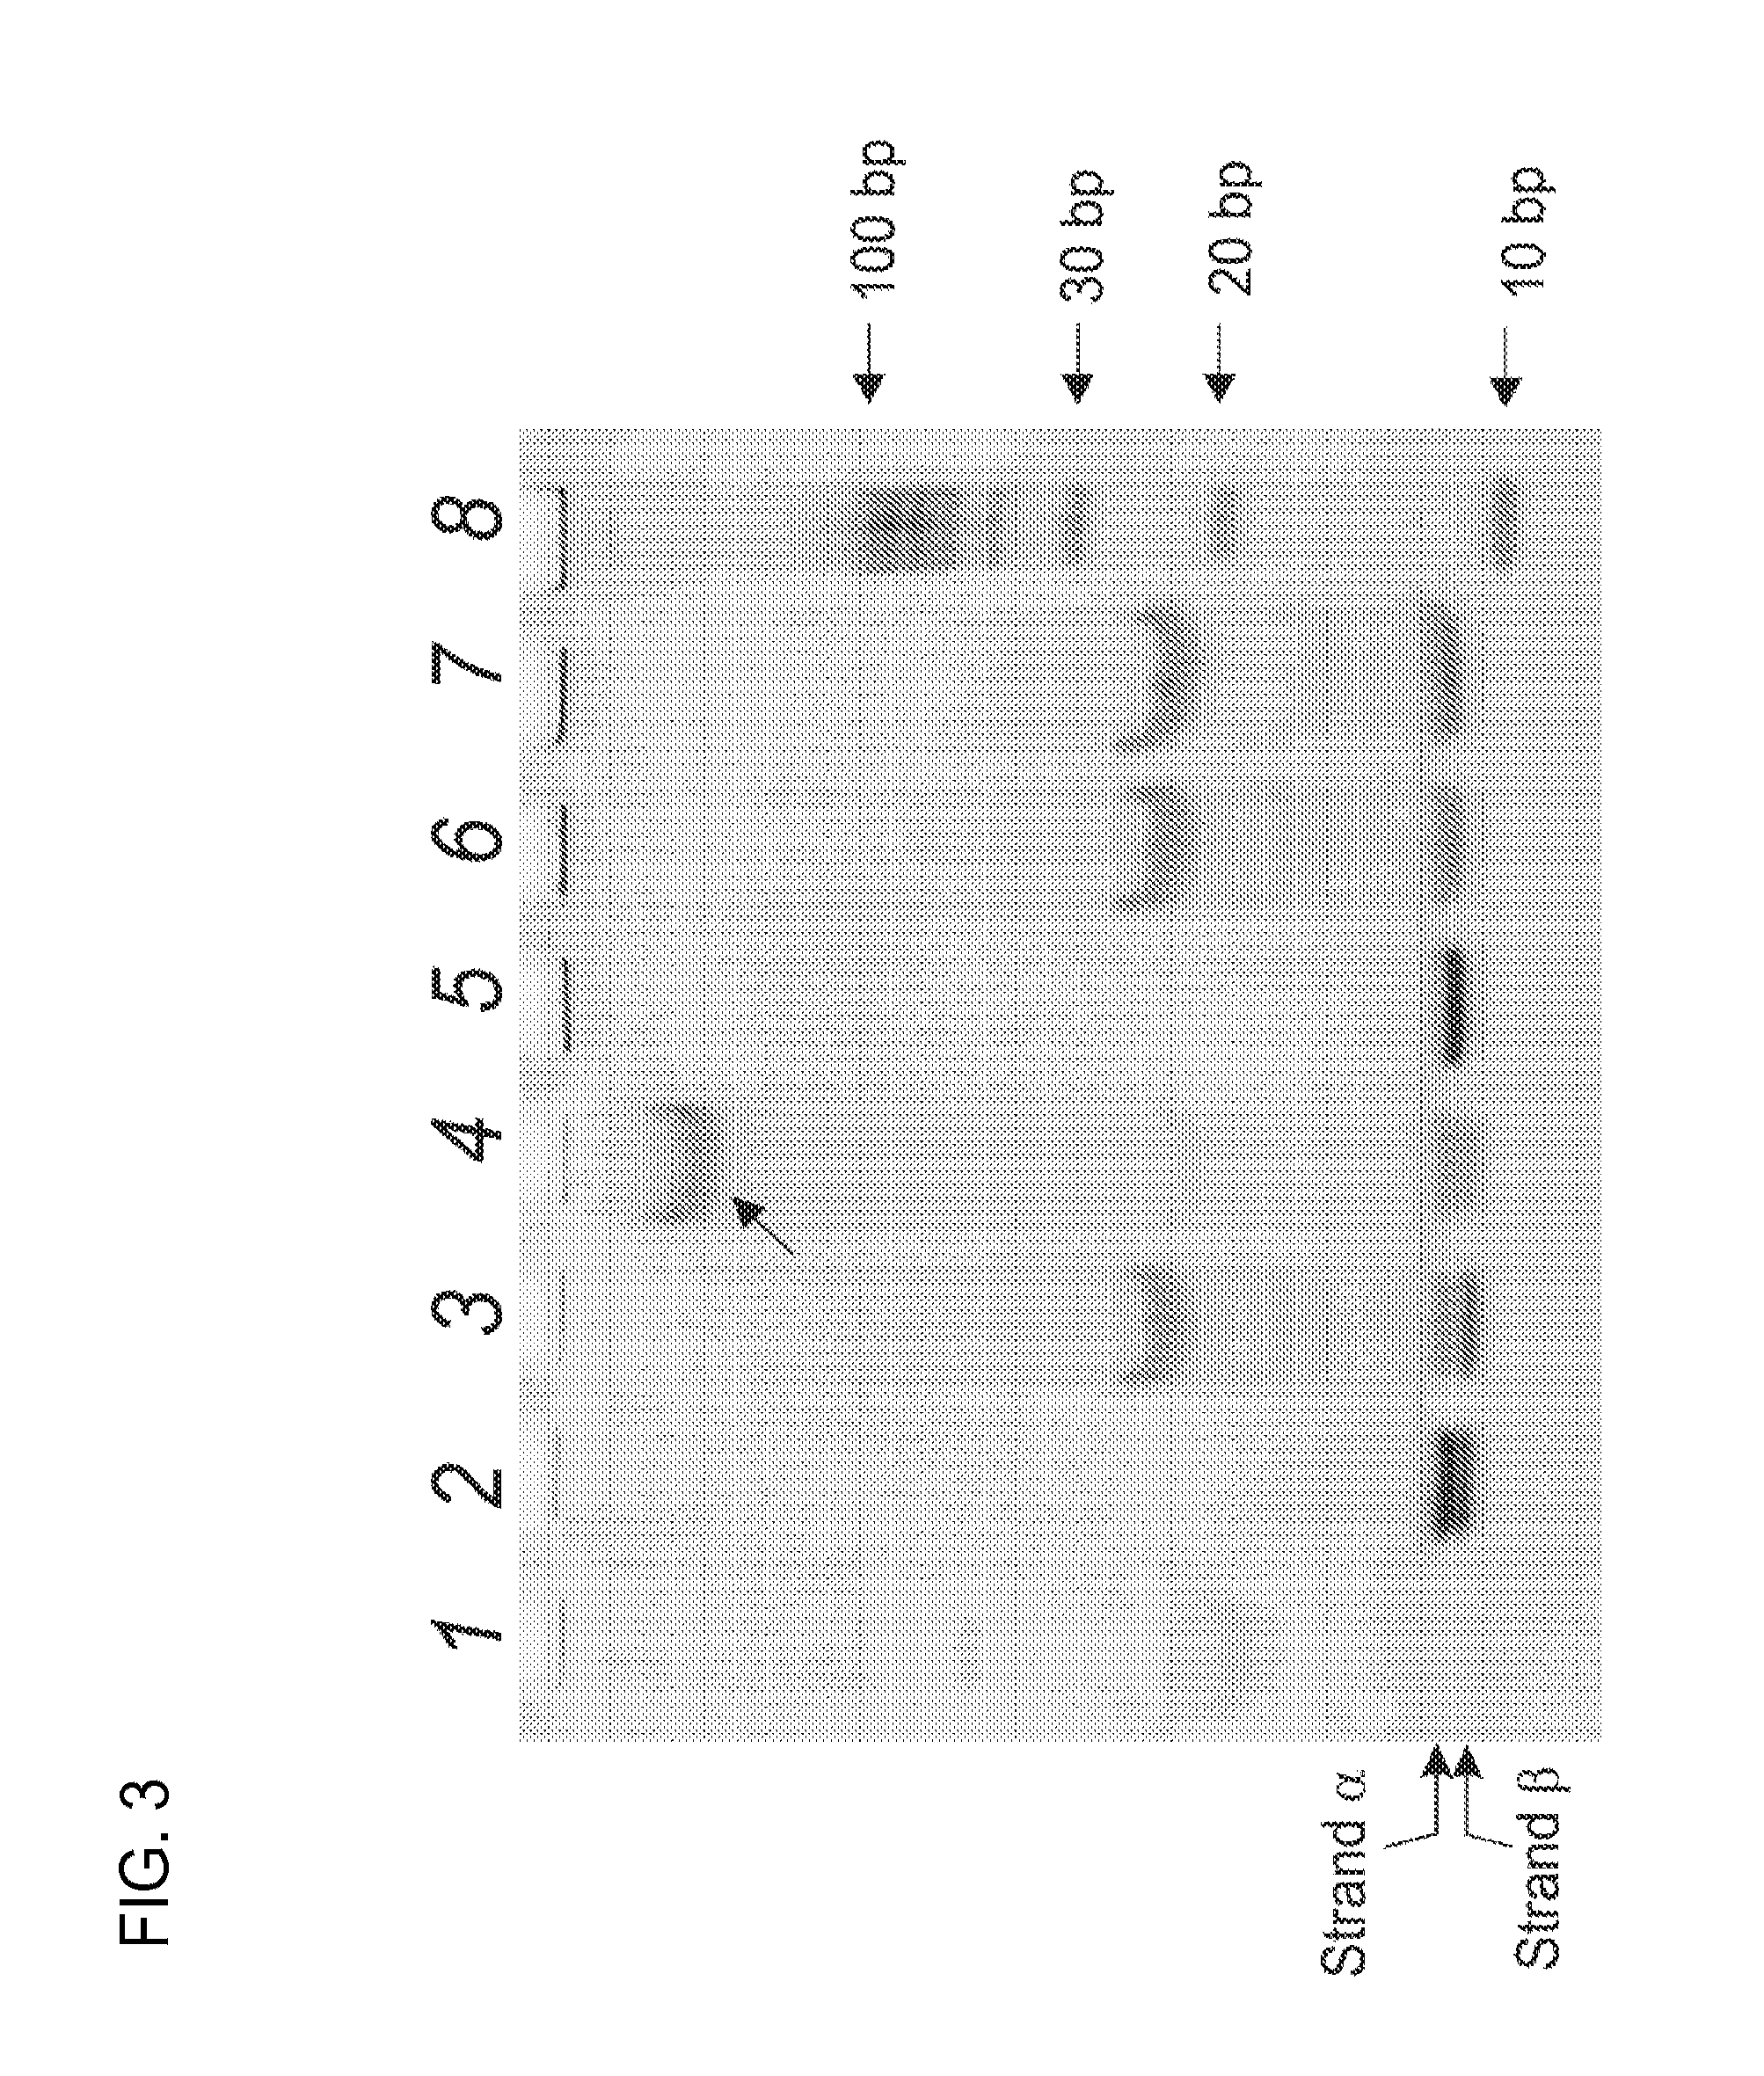 Split DNA Enzyme for Visual Single Nucleotide Polymorphism Typing